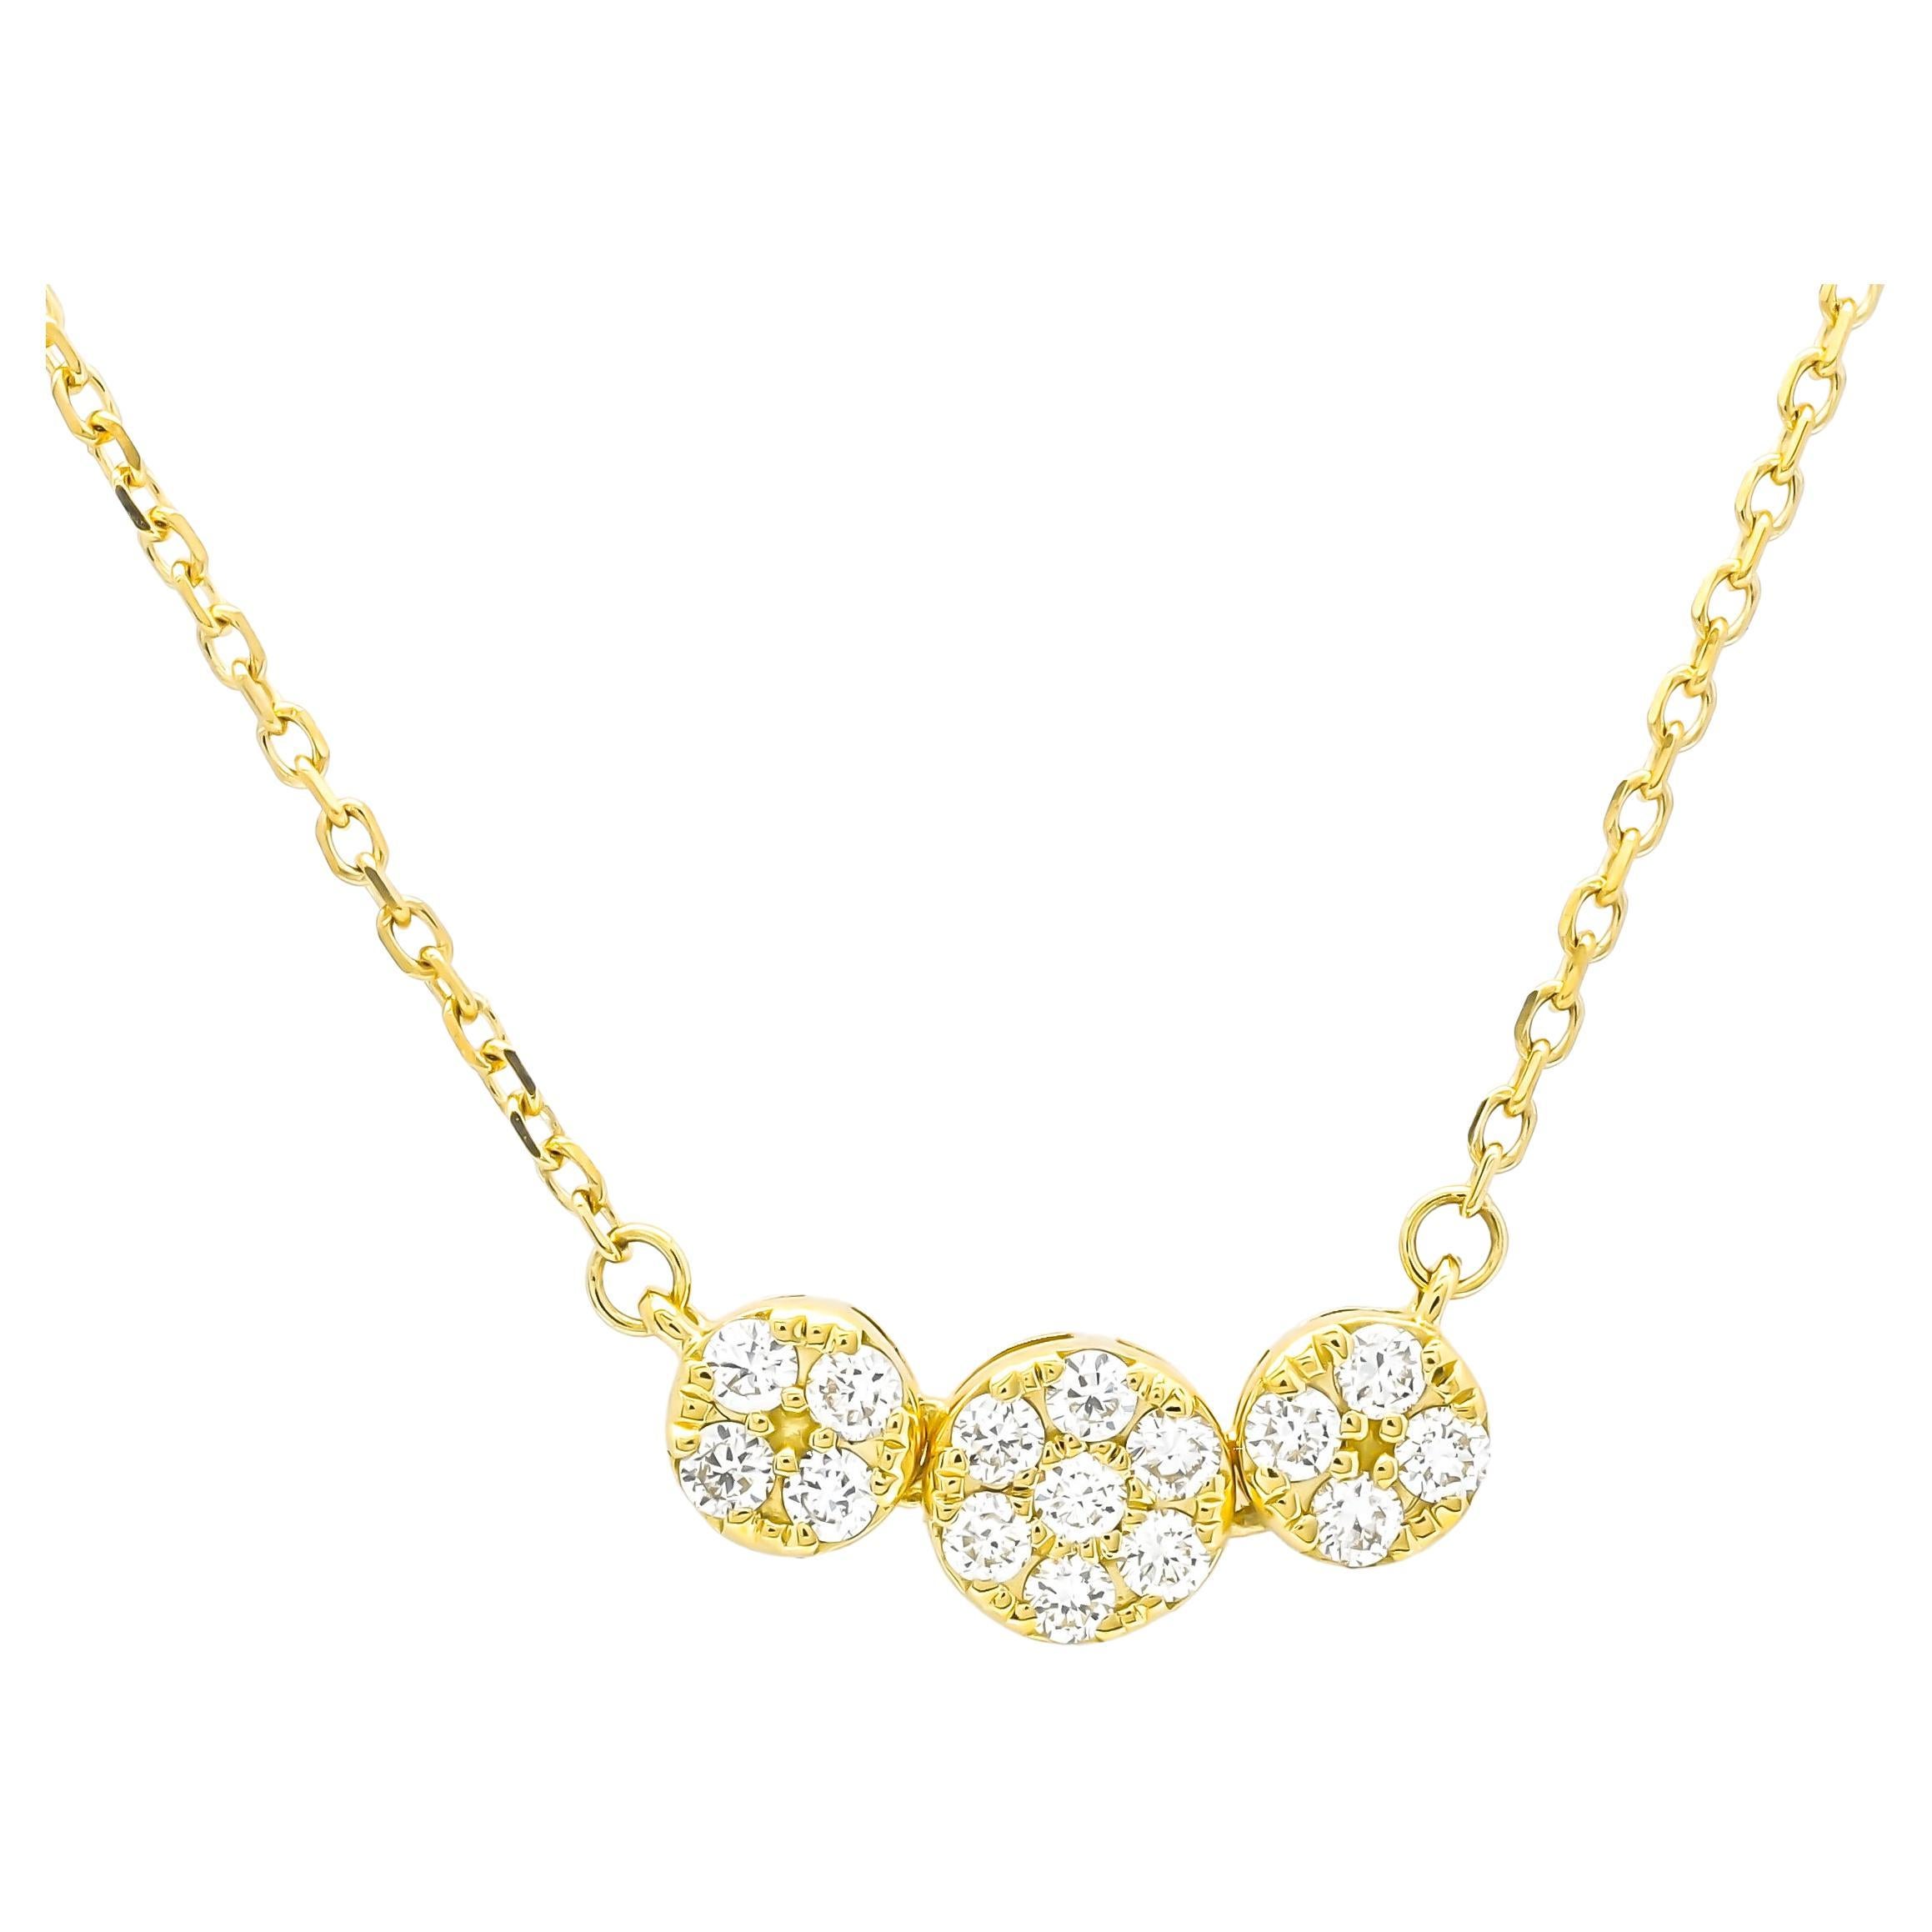 Natural Diamond 0.17 carats 18 KT Yellow Gold Chain Pendant Necklace  For Sale